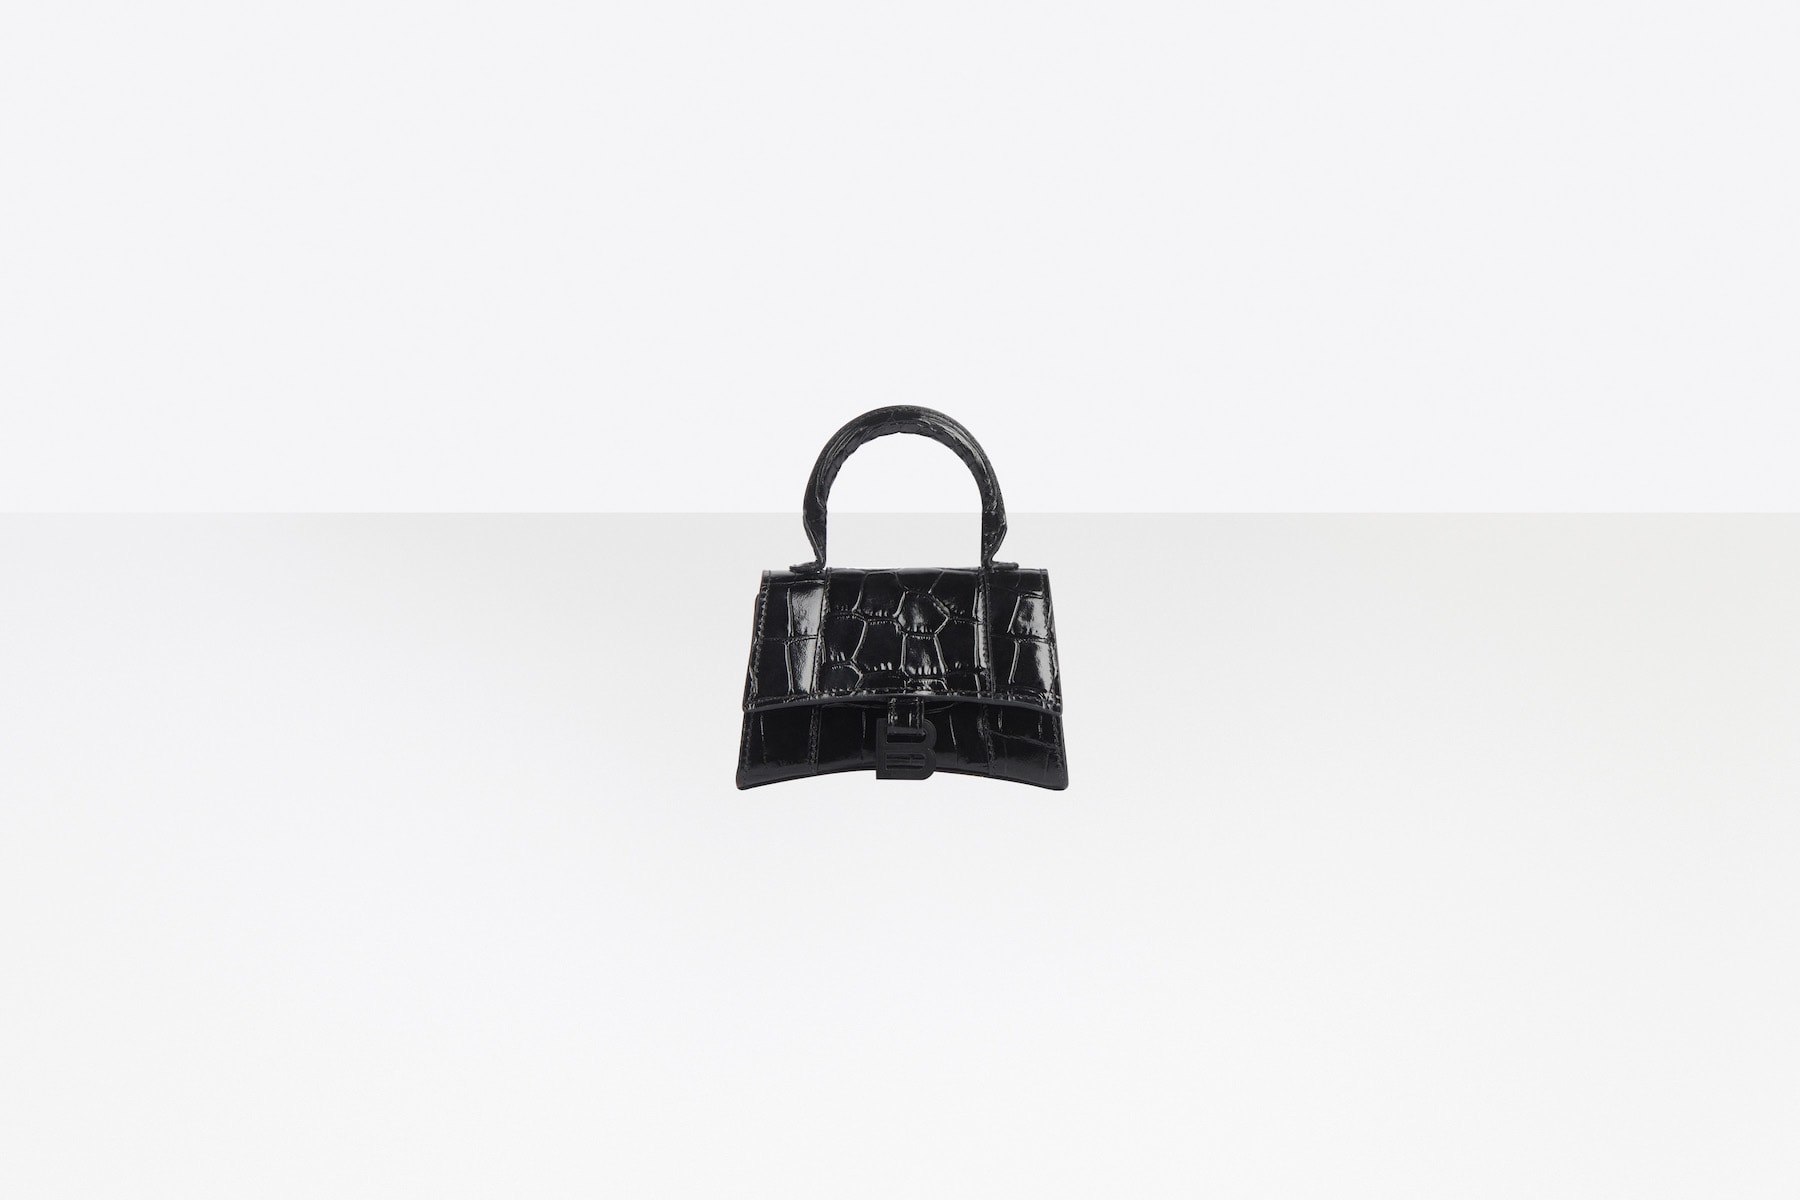 Balenciaga Valentine's Day Capsule Collection Accessories Bags Release Exclusive